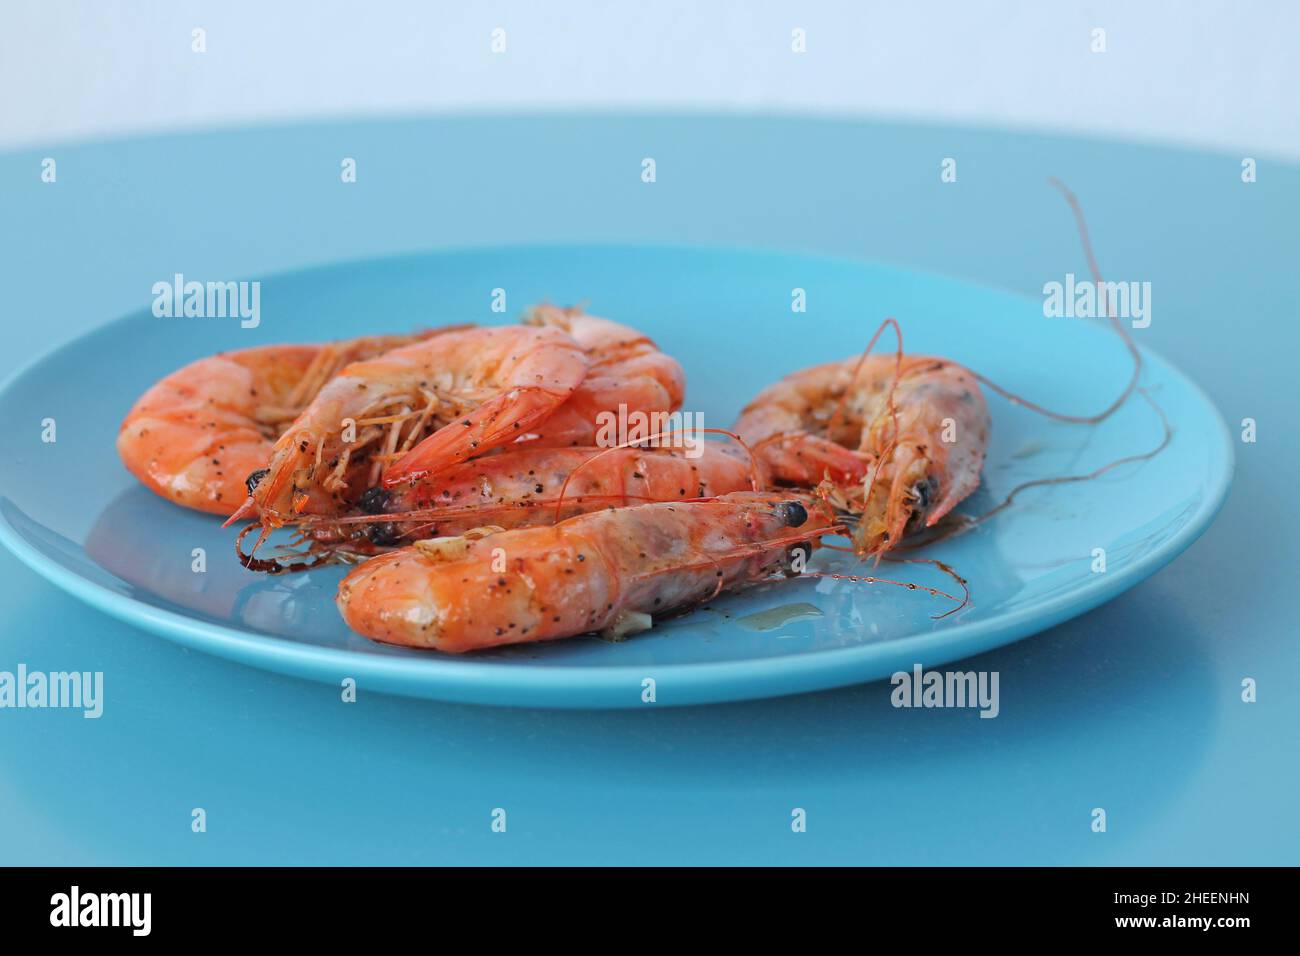 Boiled shrimps on blue plate. Healthy sea food. Stock Photo